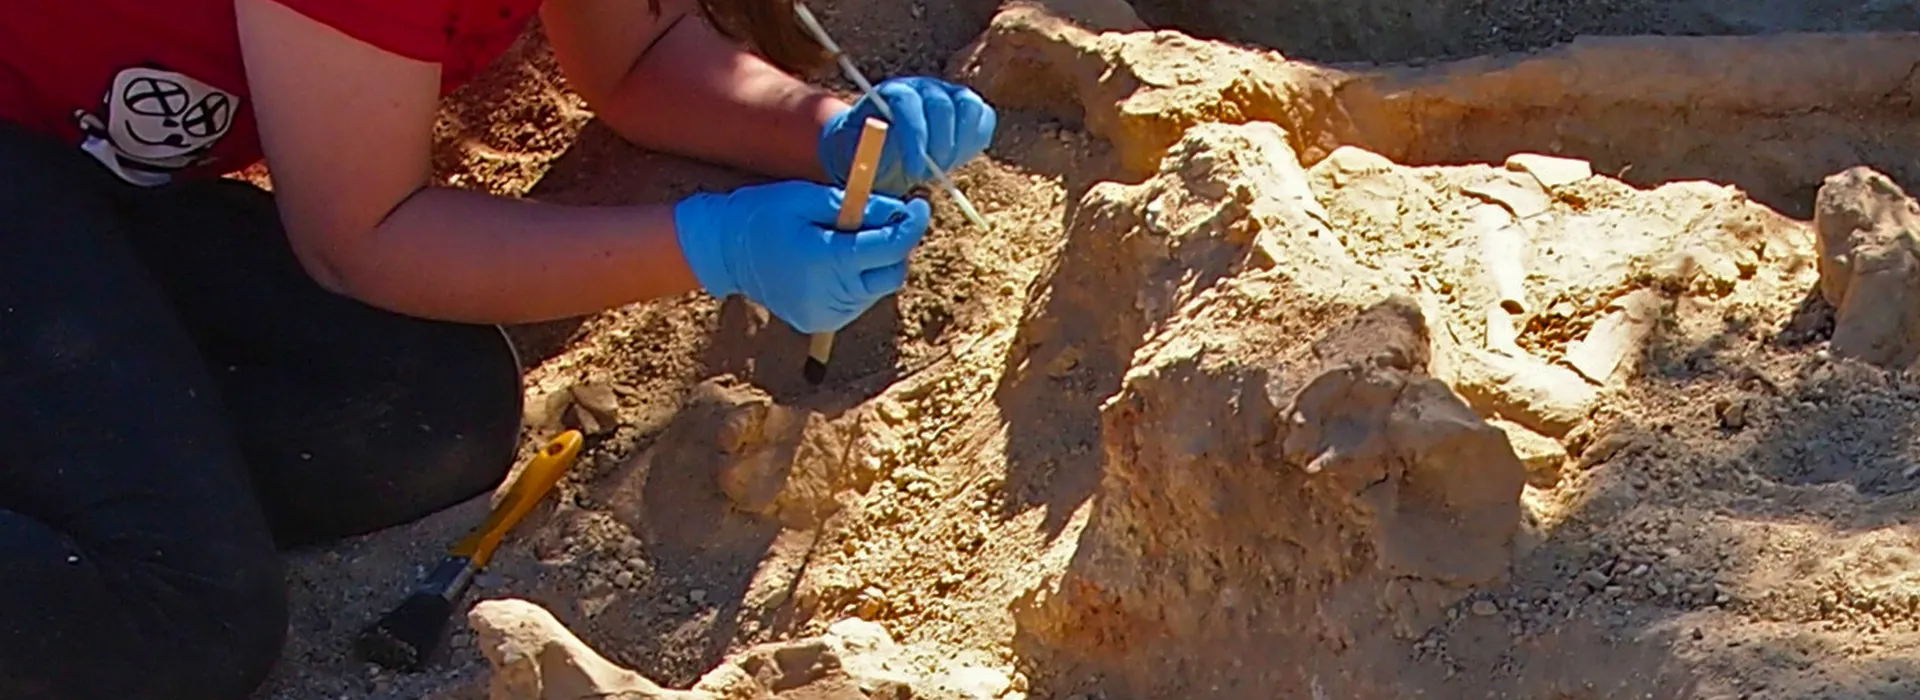 paleontology dig in New Mexico